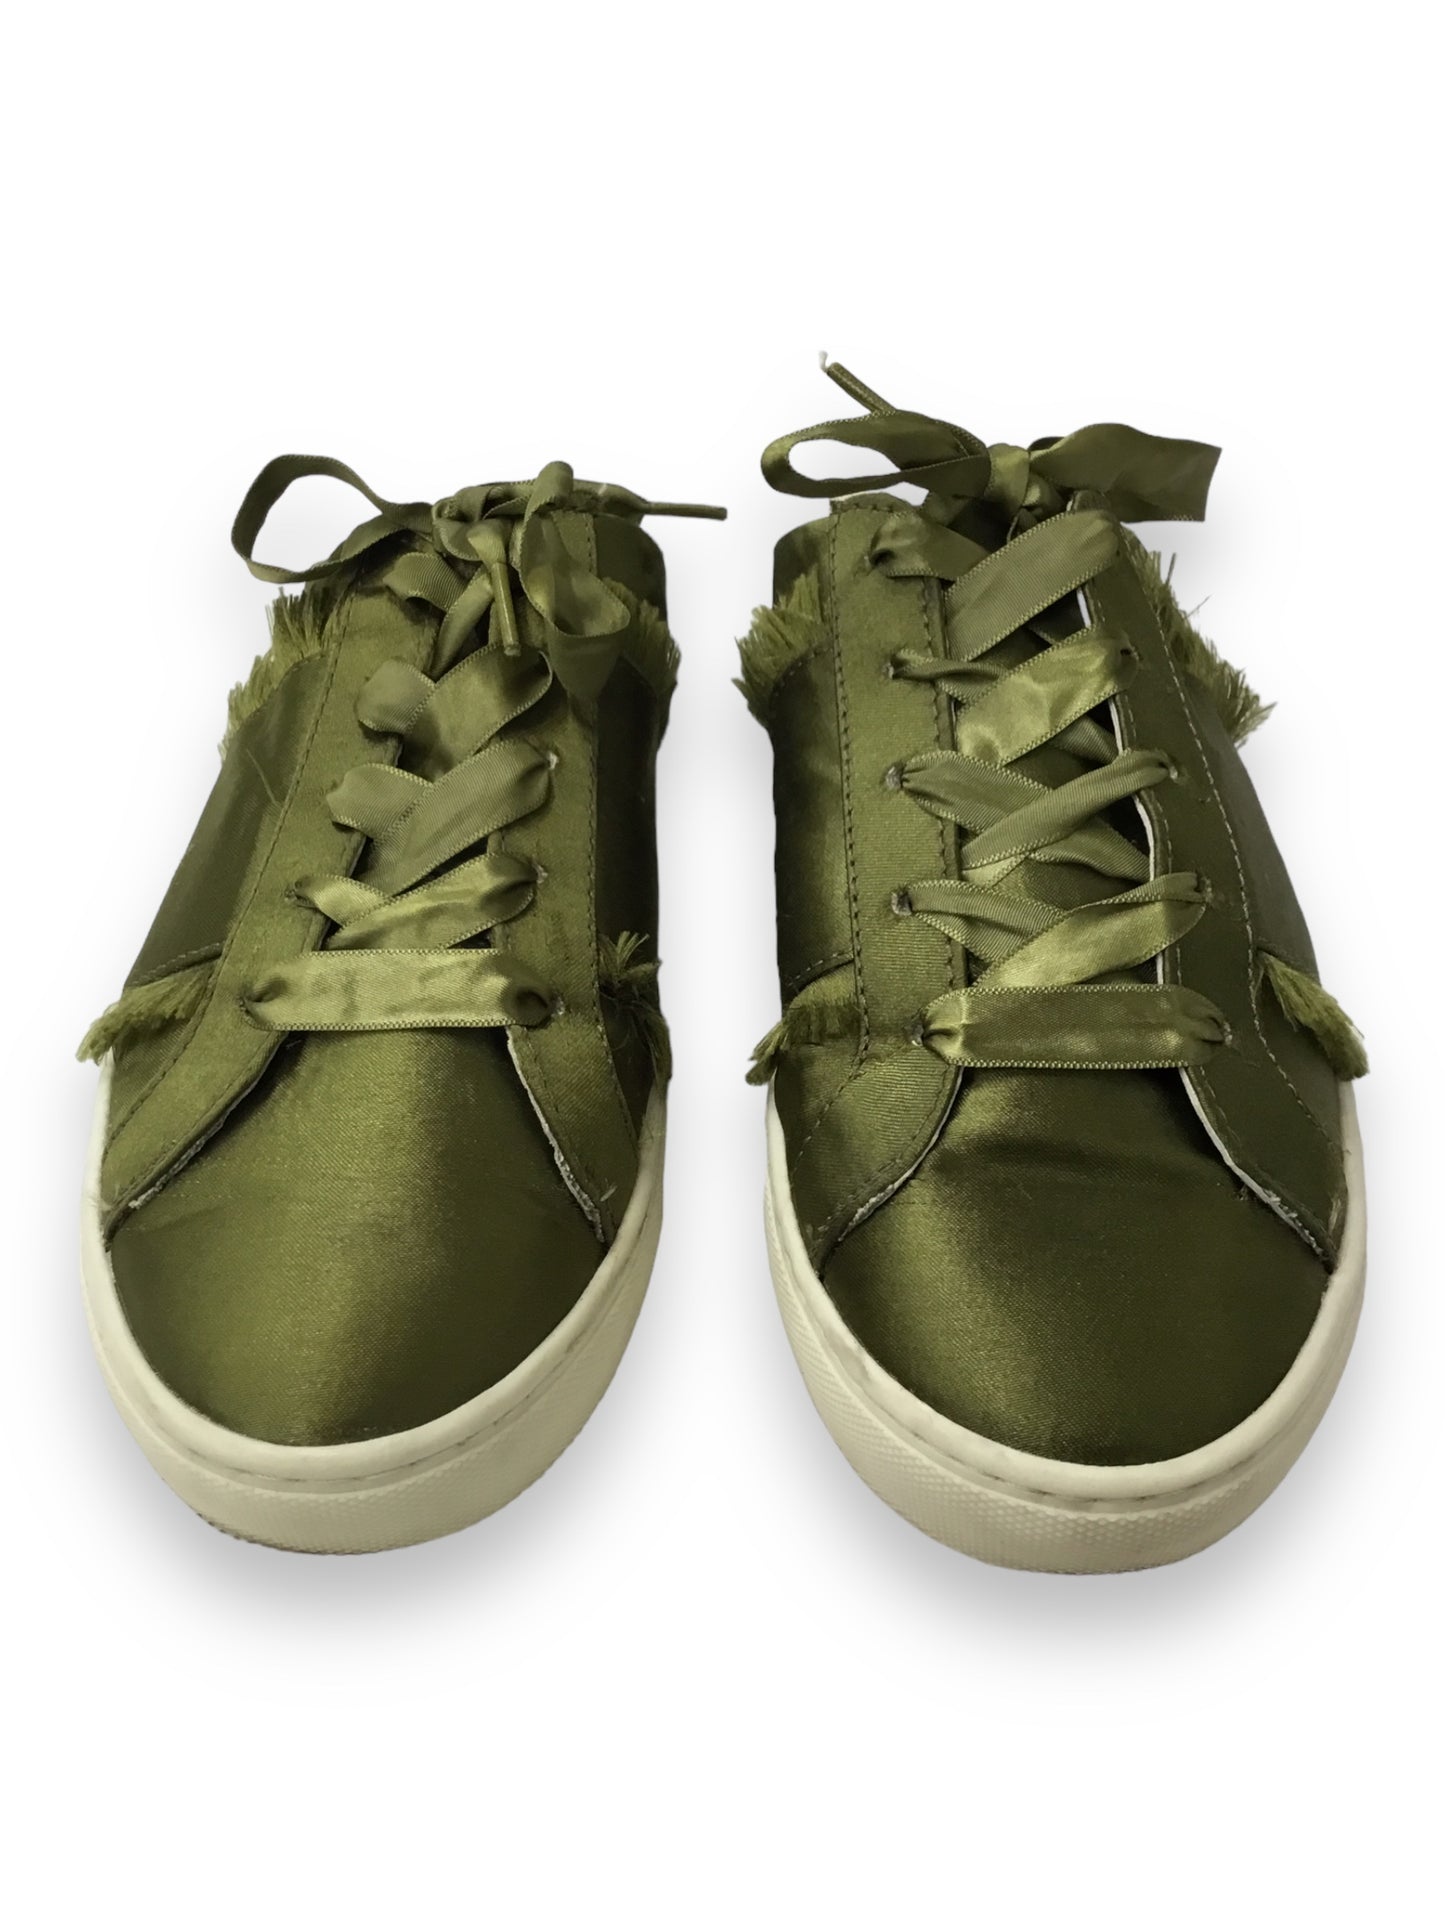 Shoes Sneakers By Free People  Size: 6.5